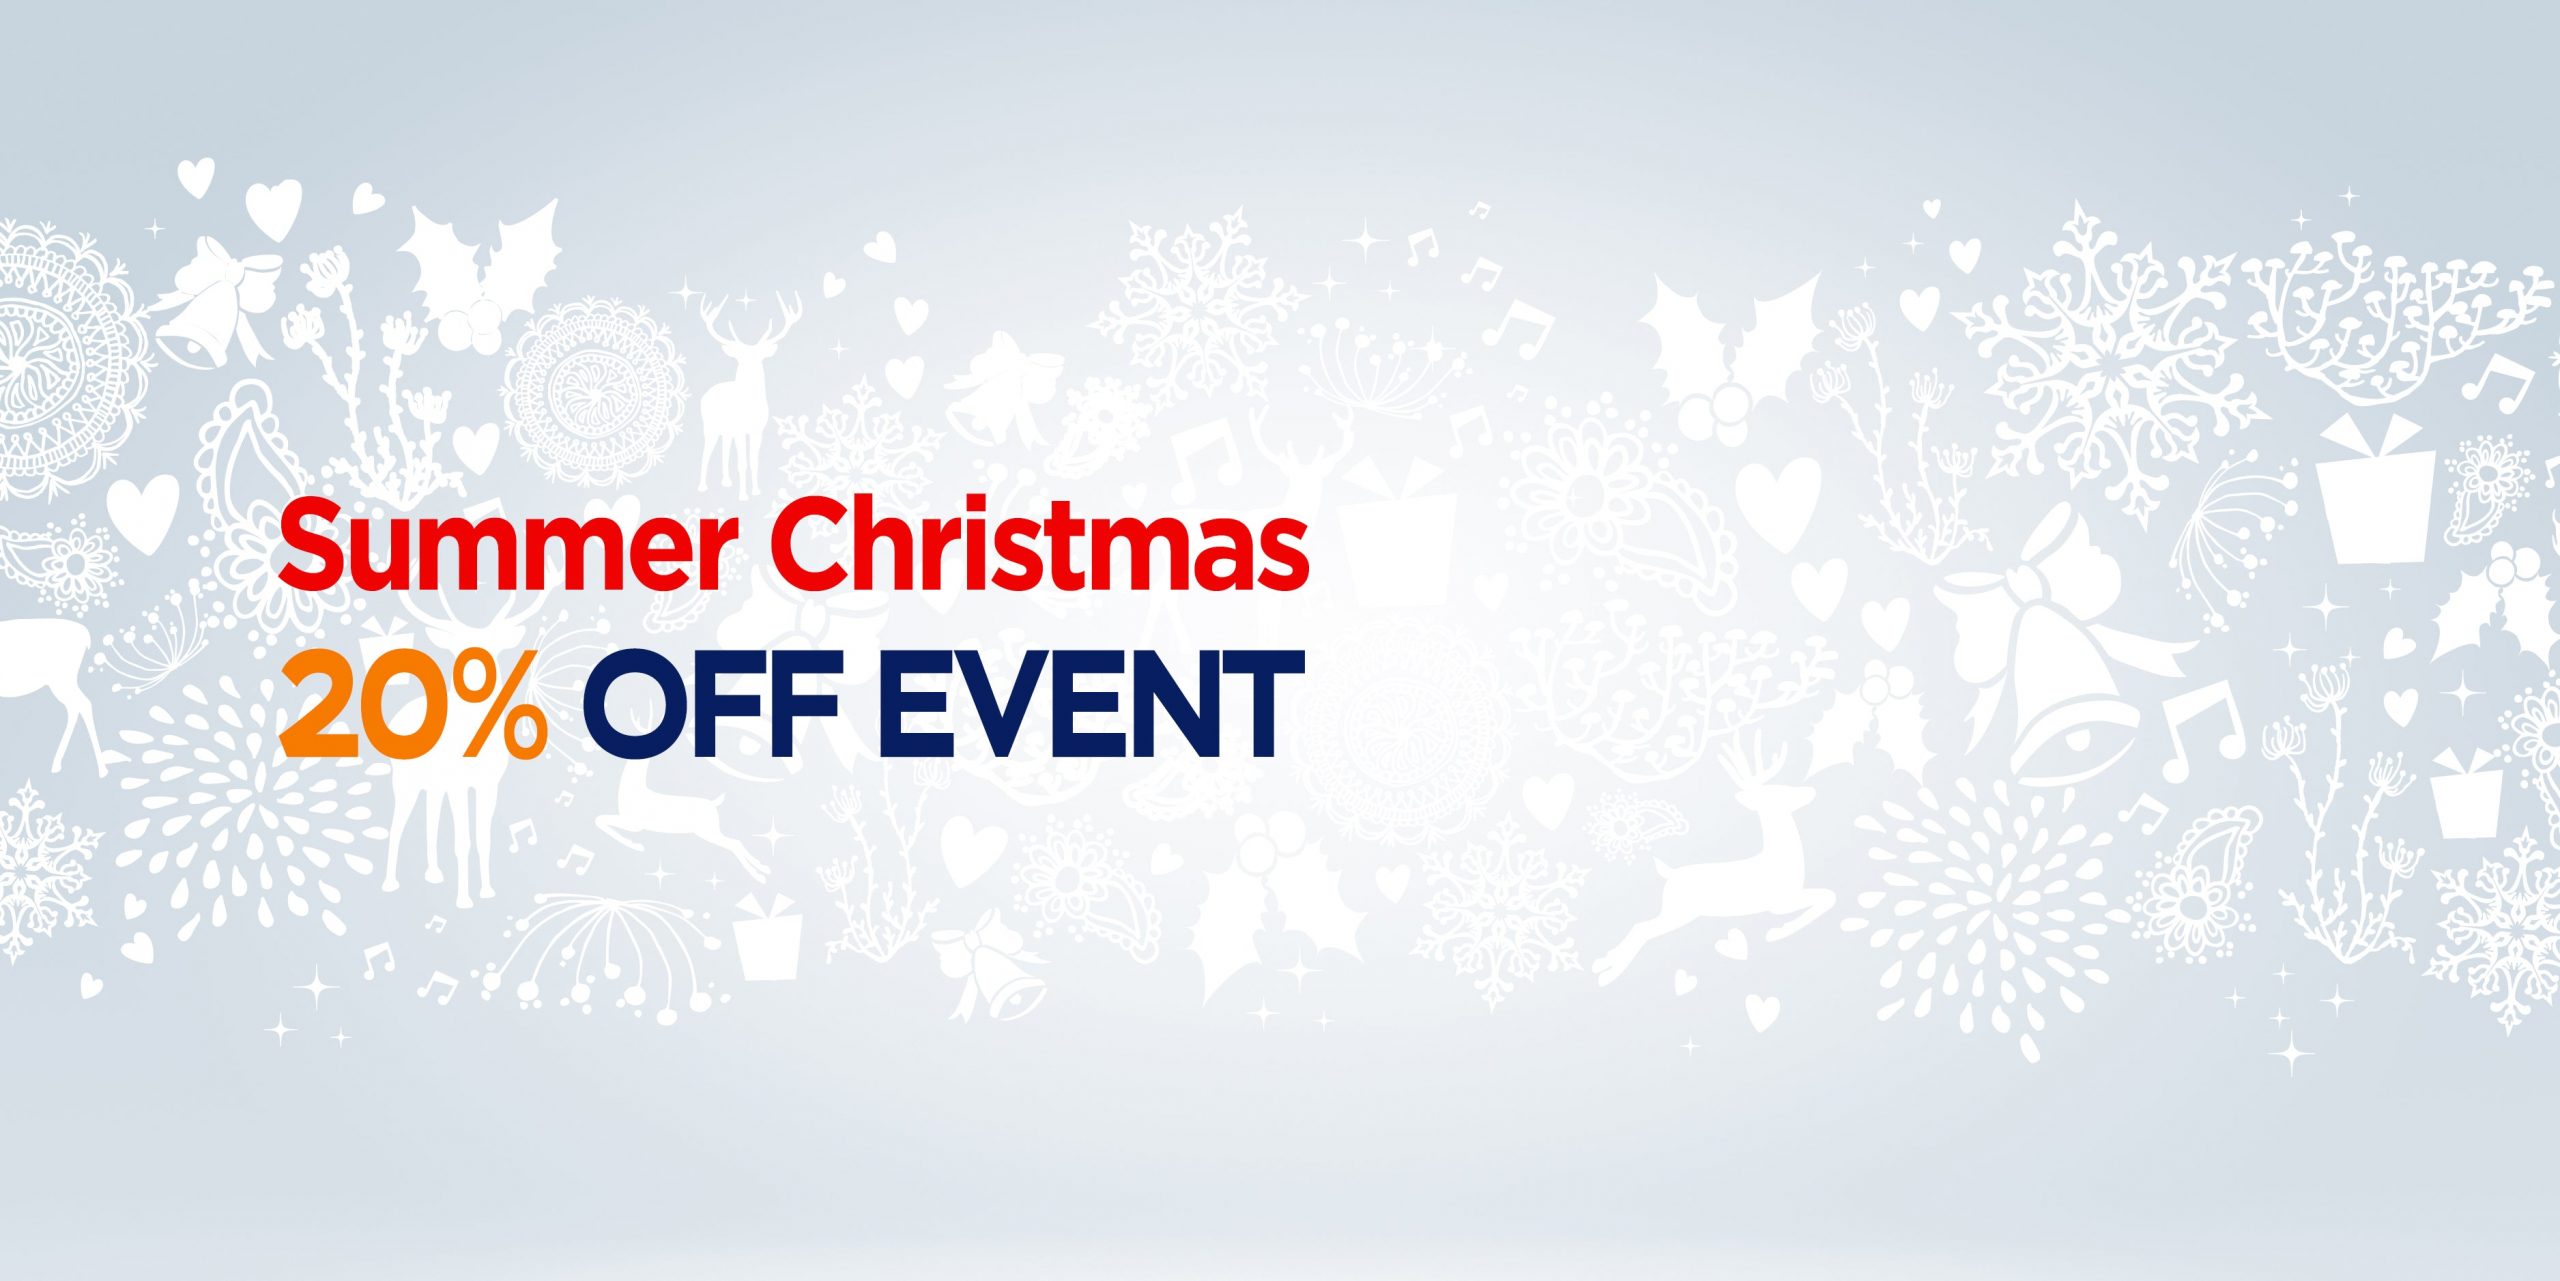 Summer Christmas 20% OFF EVENT & FREE Topper cover - Navien Mate - Heated Mattress Pad | Thermal Blanket for Bed